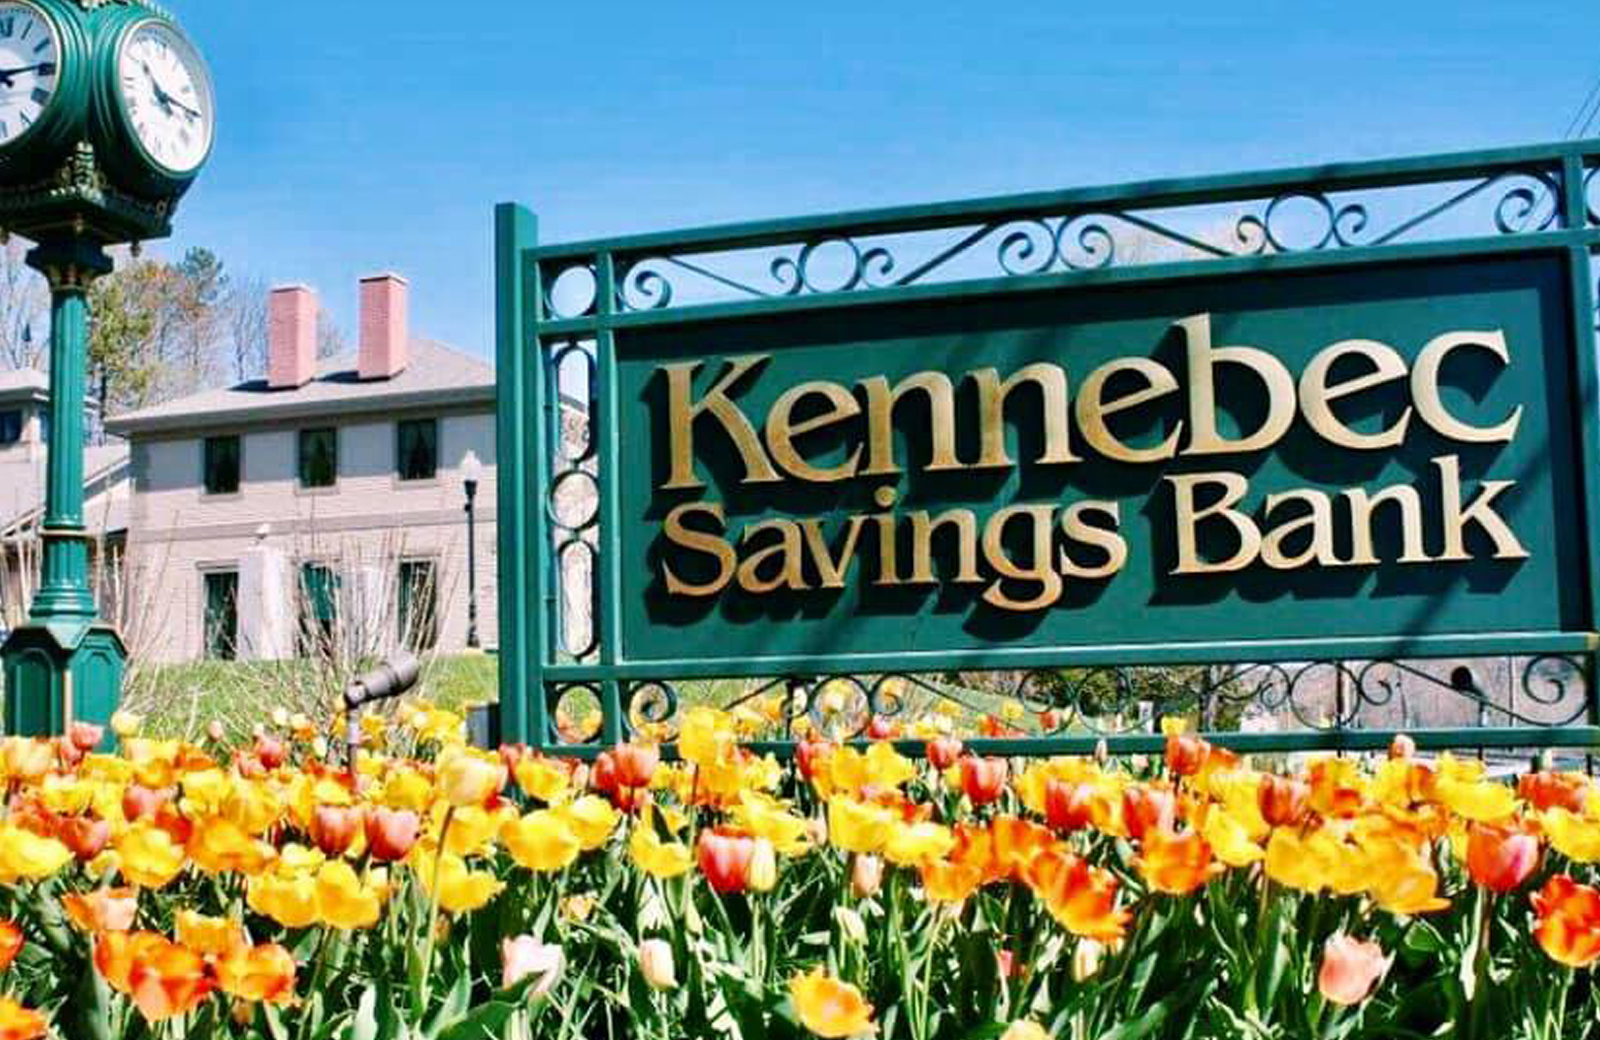 Tulips and the Kennebec Savings Bank sign